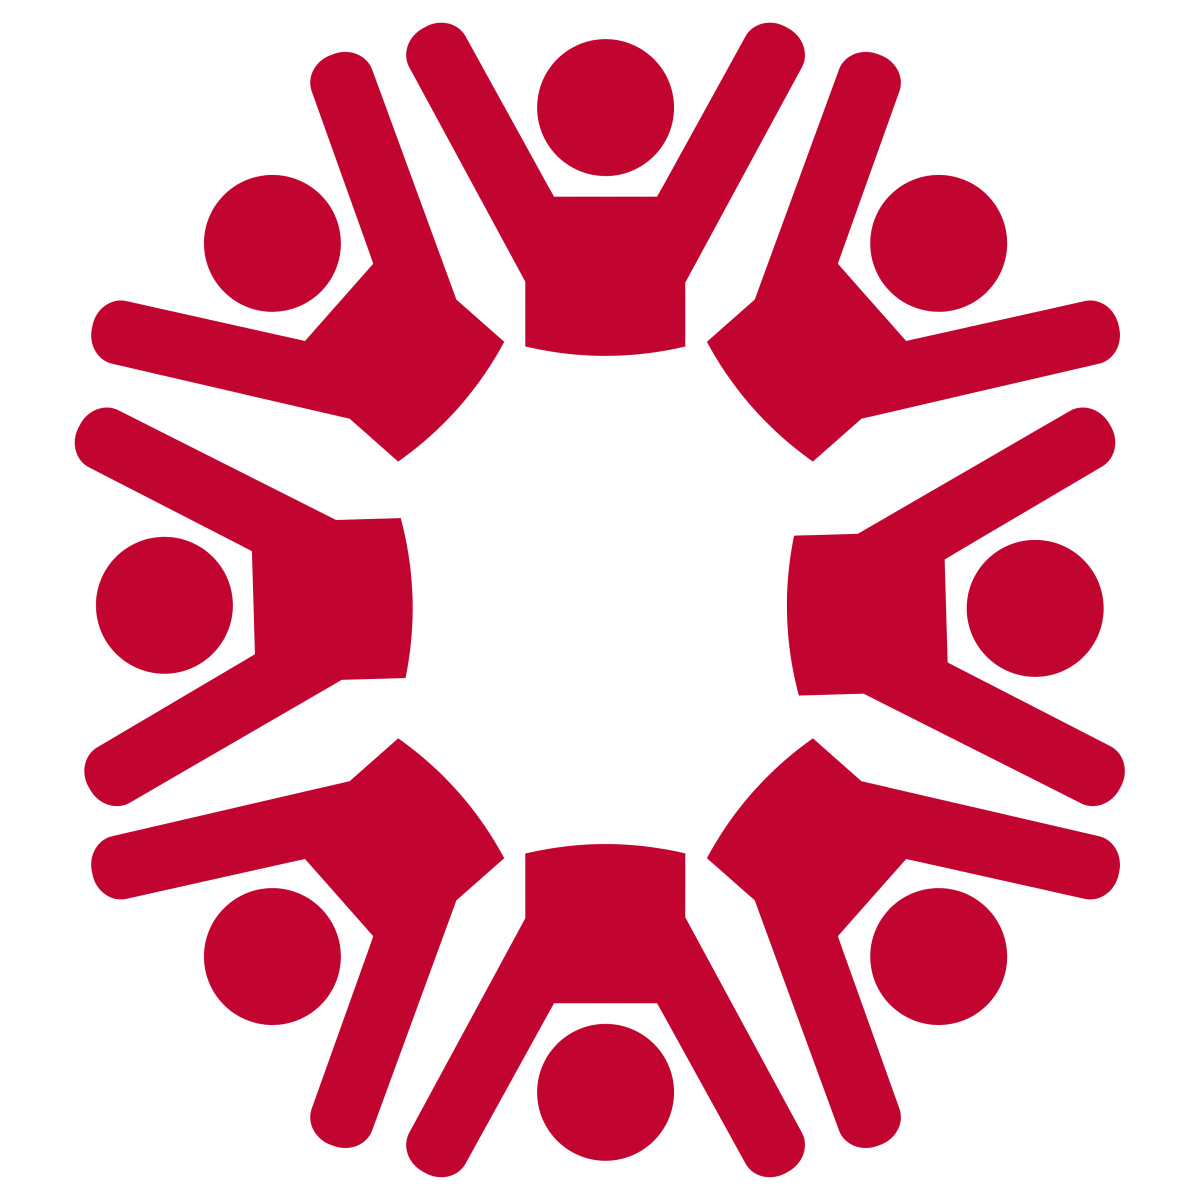 Red people facing each other in a circle with their arms in the air.